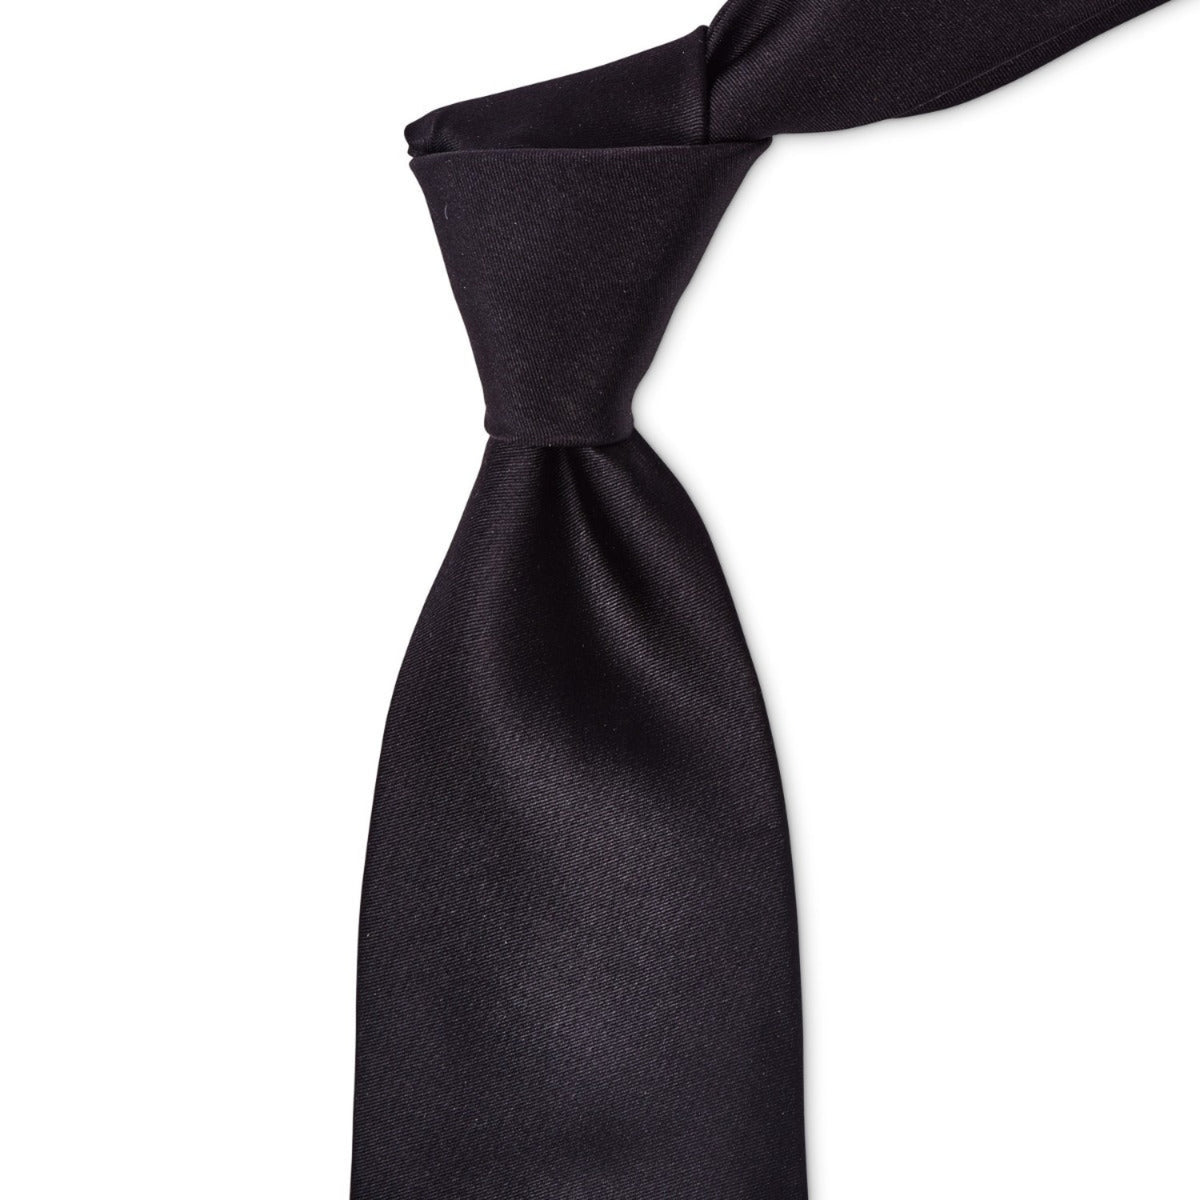 A handmade, 100% Sovereign Grade Black Solid Satin Tie from KirbyAllison.com on a white background.